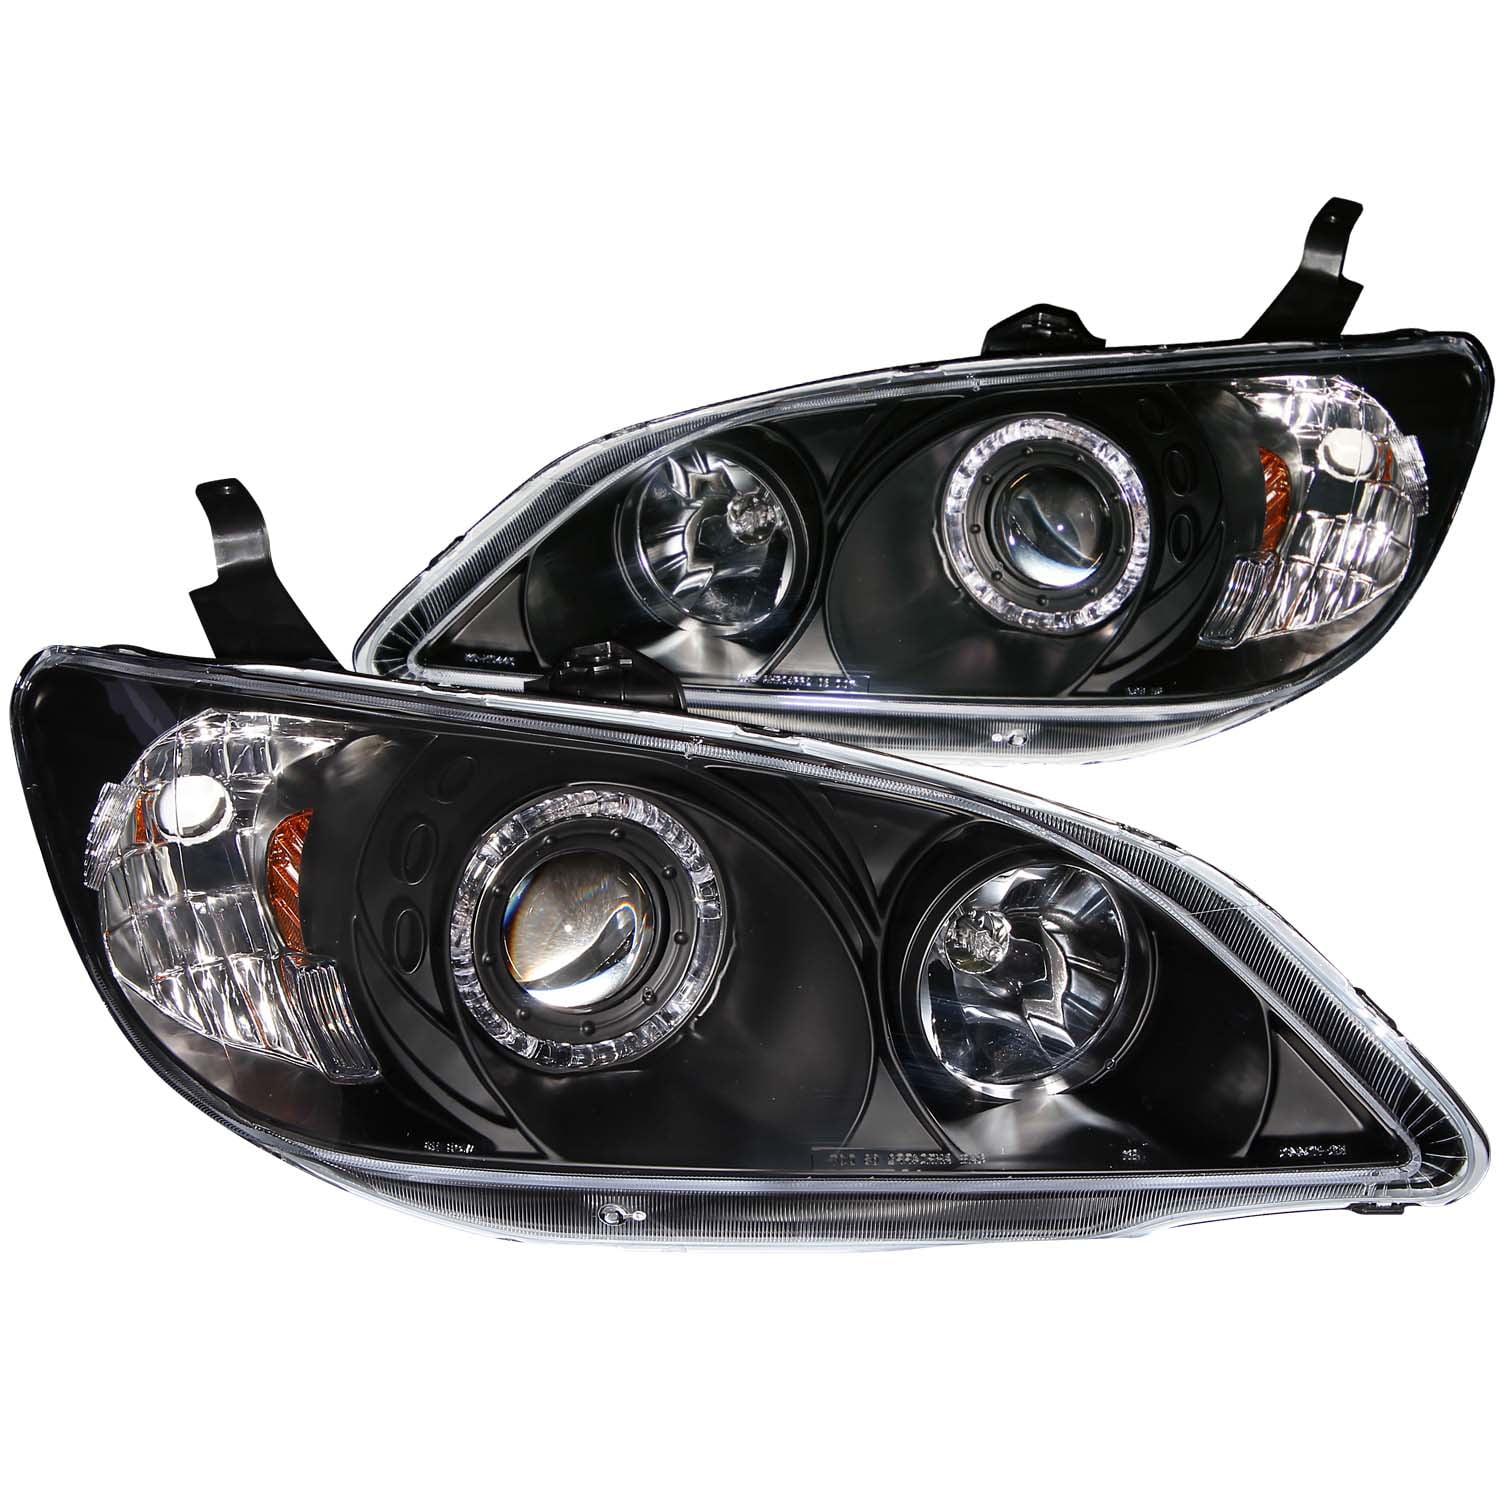 Anzo USA 121234 Honda Civic Gun-Metal Crystal Clear Headlight Assembly Sold in Pairs